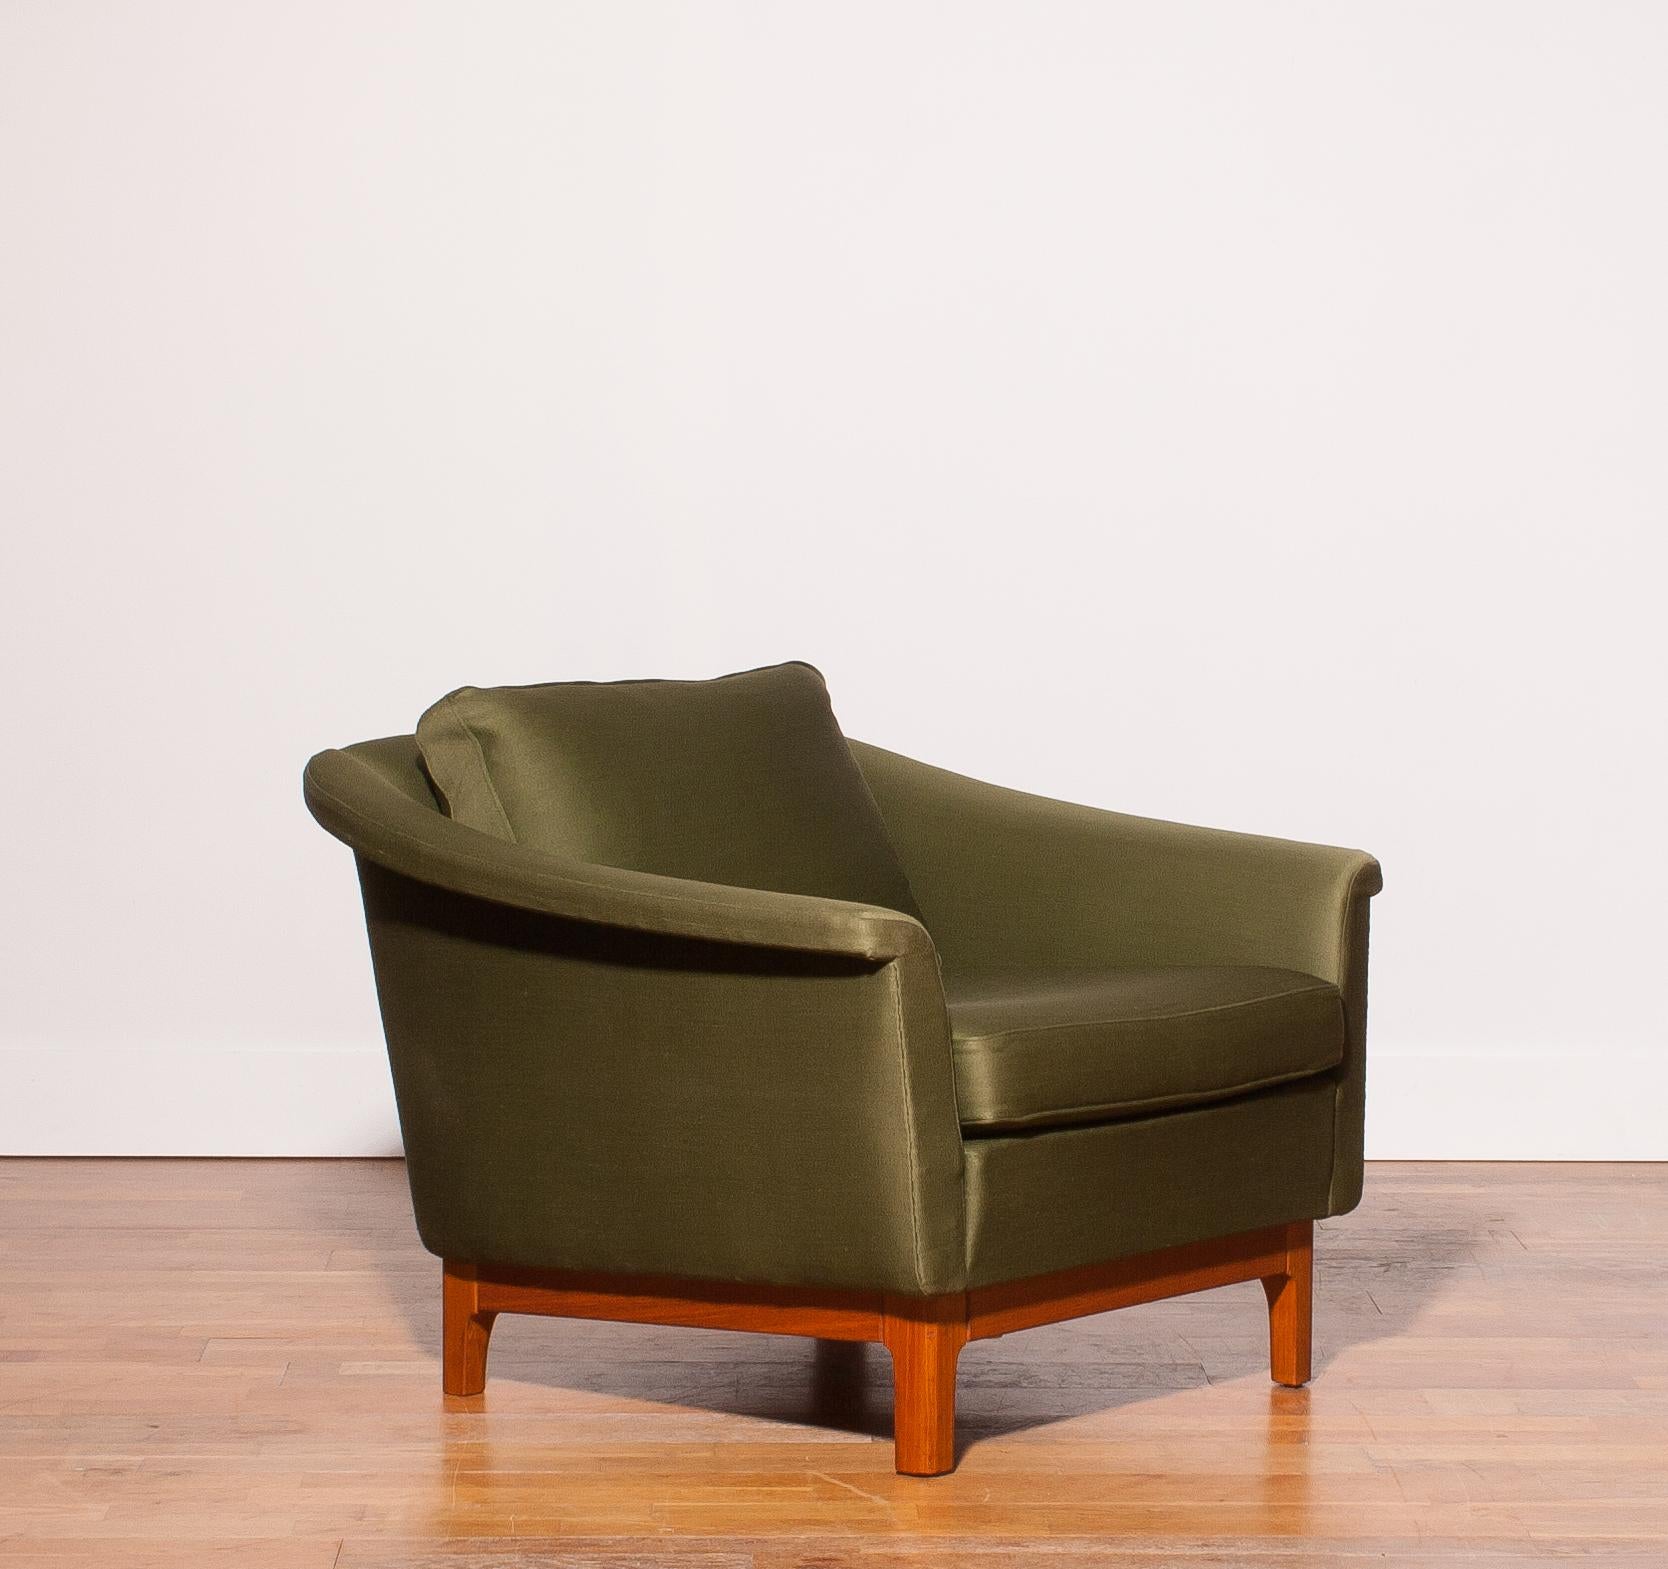 Beautiful lounge chair 'Pasadena' designed by Folke Ohlsson
and produced by DUX Ljungs Industrier, Sweden.
It is a very solid chair with a green upholstery
and teak frame.
The chair is in good condition.
Period 1960s.
Dimensions: H 65 cm, W 85